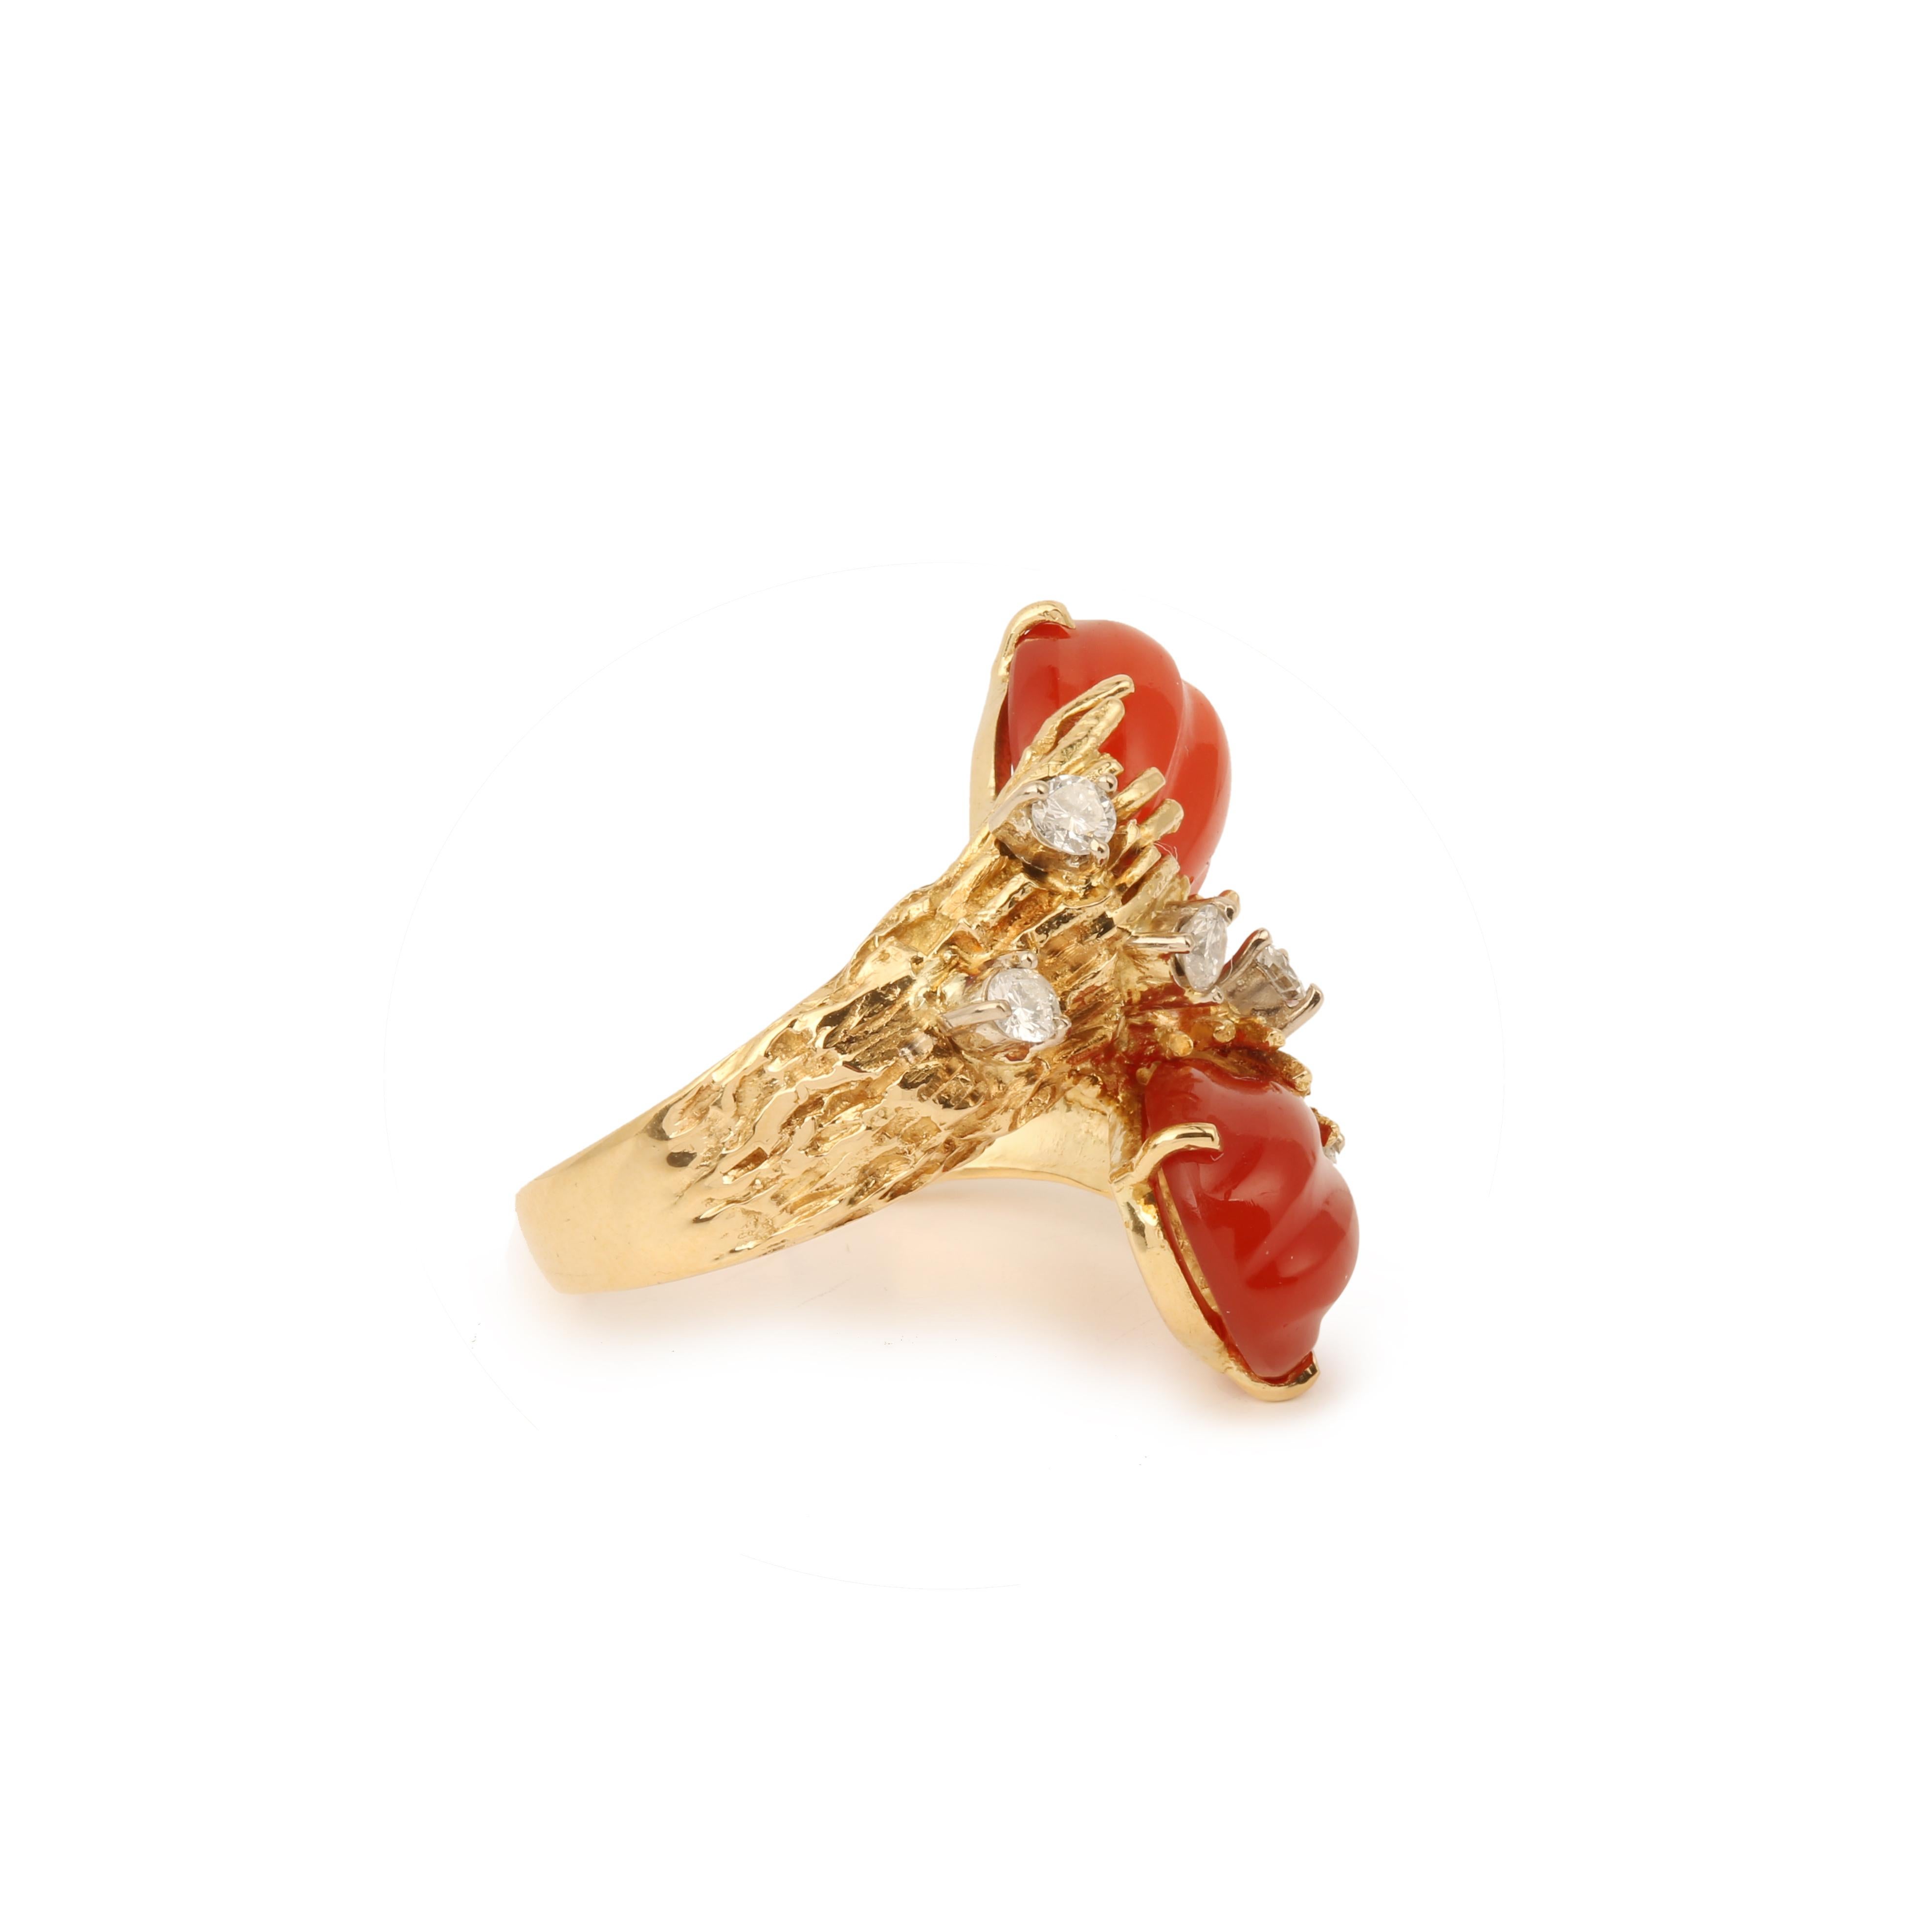 Gorgeous toi & moi ring in textured yellow gold with a bark motif set with carnelian cabochons and diamonds.

Total estimated weight of carnelian: 7 carats

Estimated total weight of diamonds: 0.35 carats

Dimensions : 26.14 x 20.32 x 6.95 mm (1.029